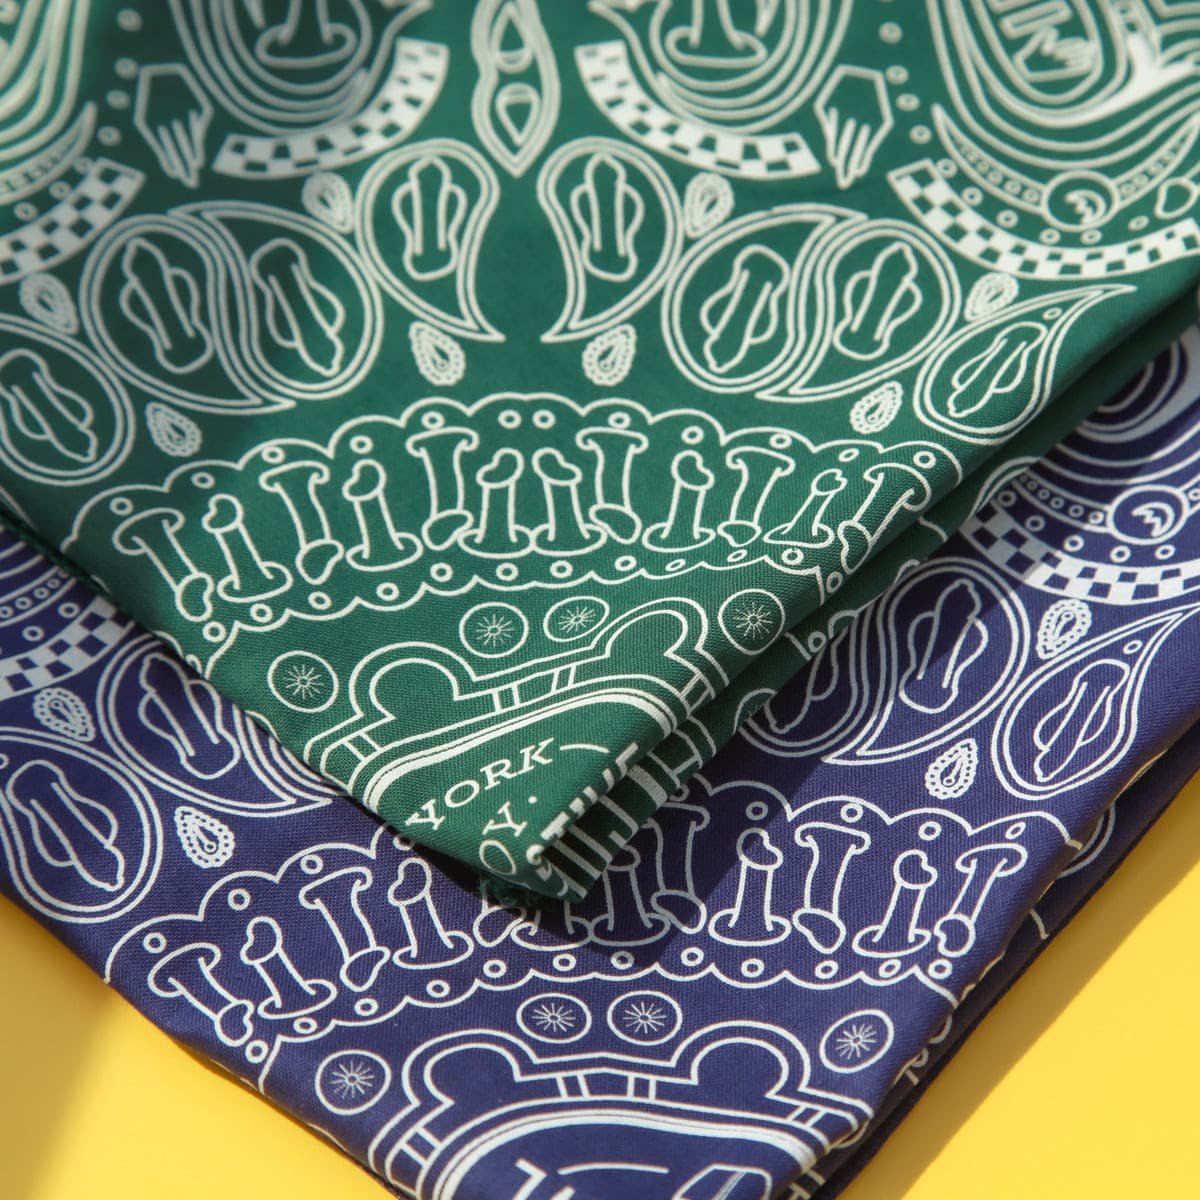 Hankies shown in blue and green